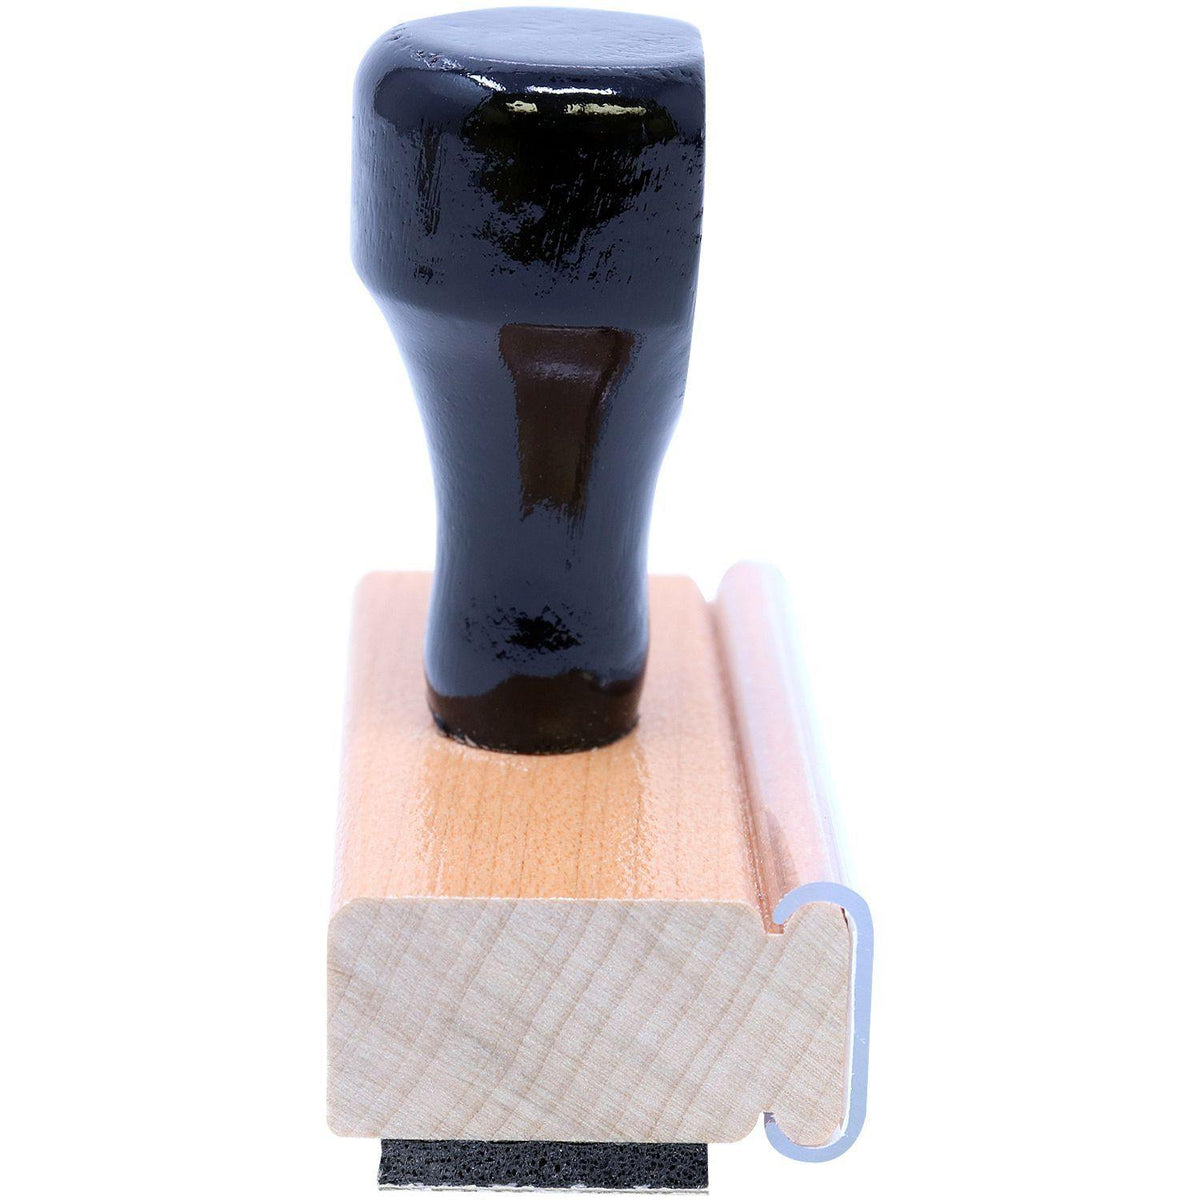 Side View of Large Hmo Ppo Rubber Stamp Alt 1